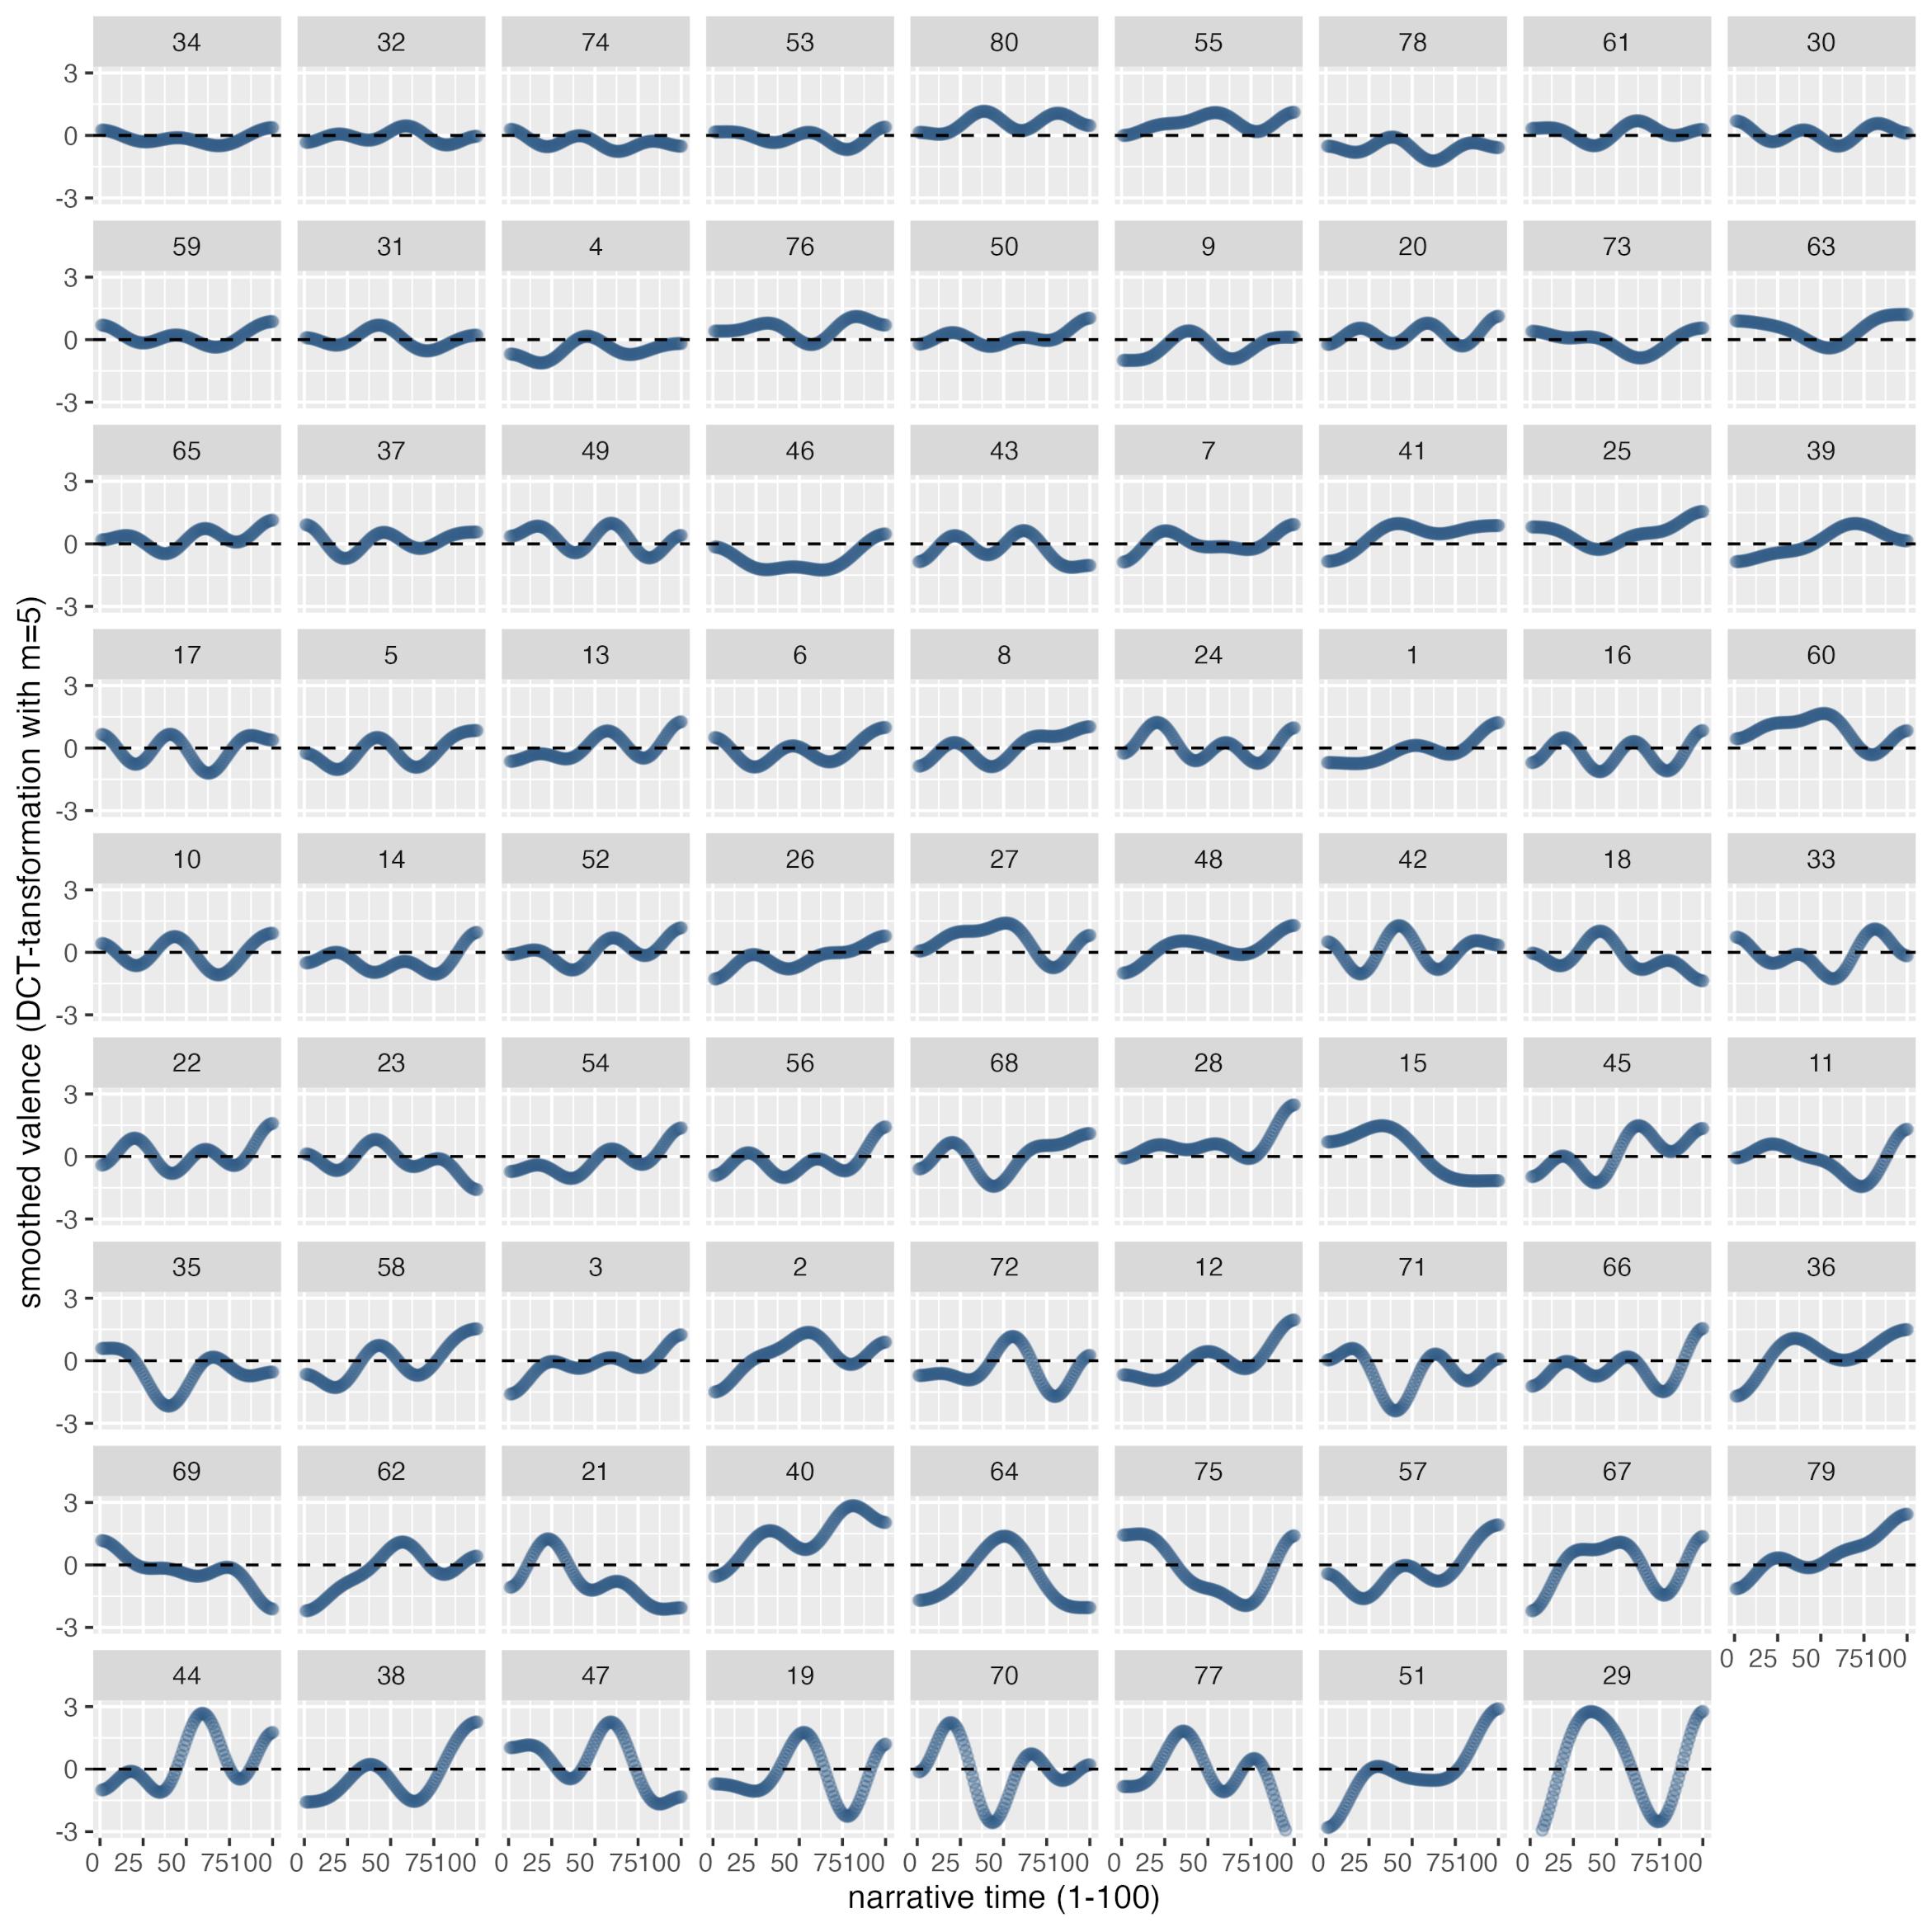 
                              Fig. 3: Emotional Arcs of all
                              fairy tales in <i>ChildTale-A</i> based on DCT-smoothed valence annotations.
                              Narrative time is normalized to a time window from 1 to 100. The
                              Emotional Arcs are ordered according to the ascending range of the
                              emotion trajectories, defined as the difference between the highest
                              and lowest smoothed valence value. The assignment of the IDs to the
                              fairy tales can be found in Table S1. Black dashed lines indicate the
                              theoretical mean of the valence scale. [Graphic: Berenike Herrmann
                              / Jana Lüdtke 2023] 
                           